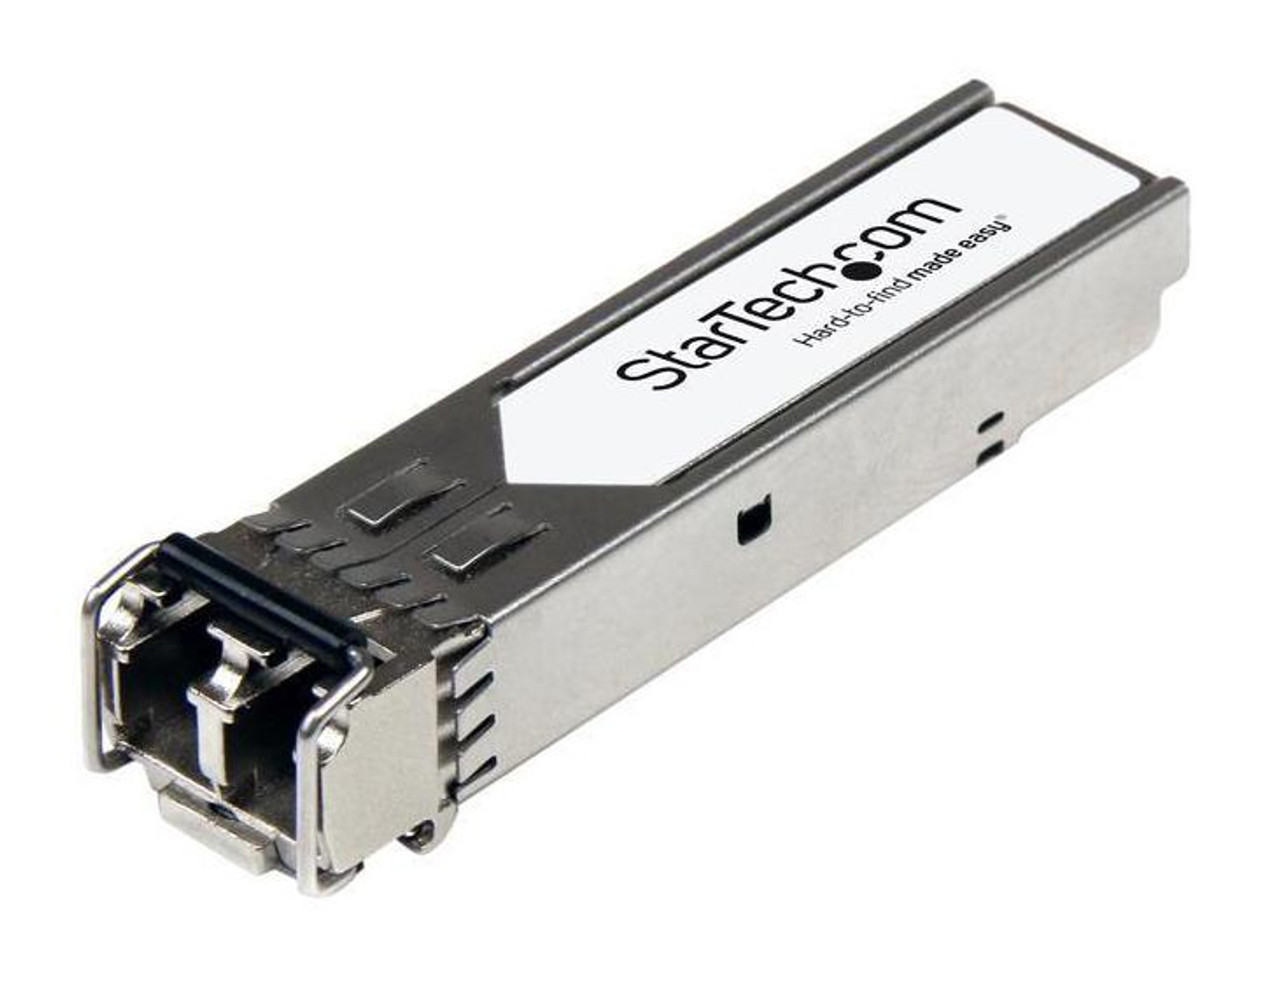 JD094A-ST StarTech 10Gbps 10GBase-LR Single-mode Fiber 10km 1310nm LC Connector SFP+ Transceiver Module for HP Compatible